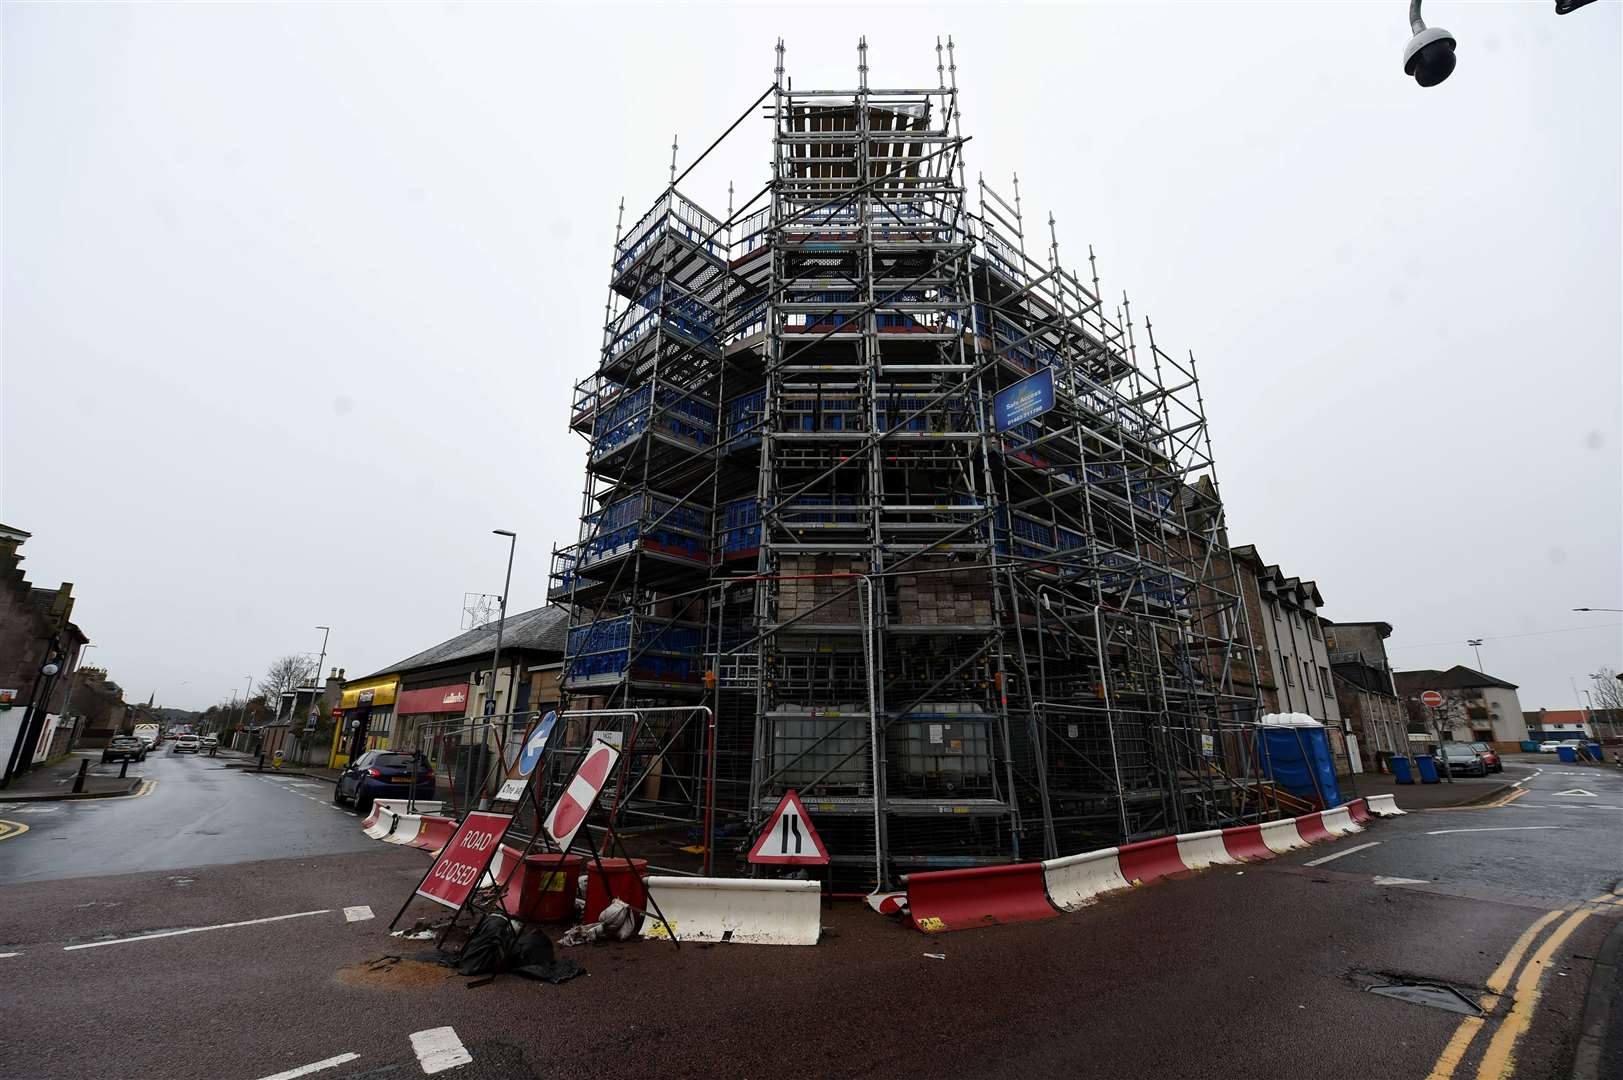 The building which was hit by the car was badly damaged and encased in scaffolding for months after the incident.